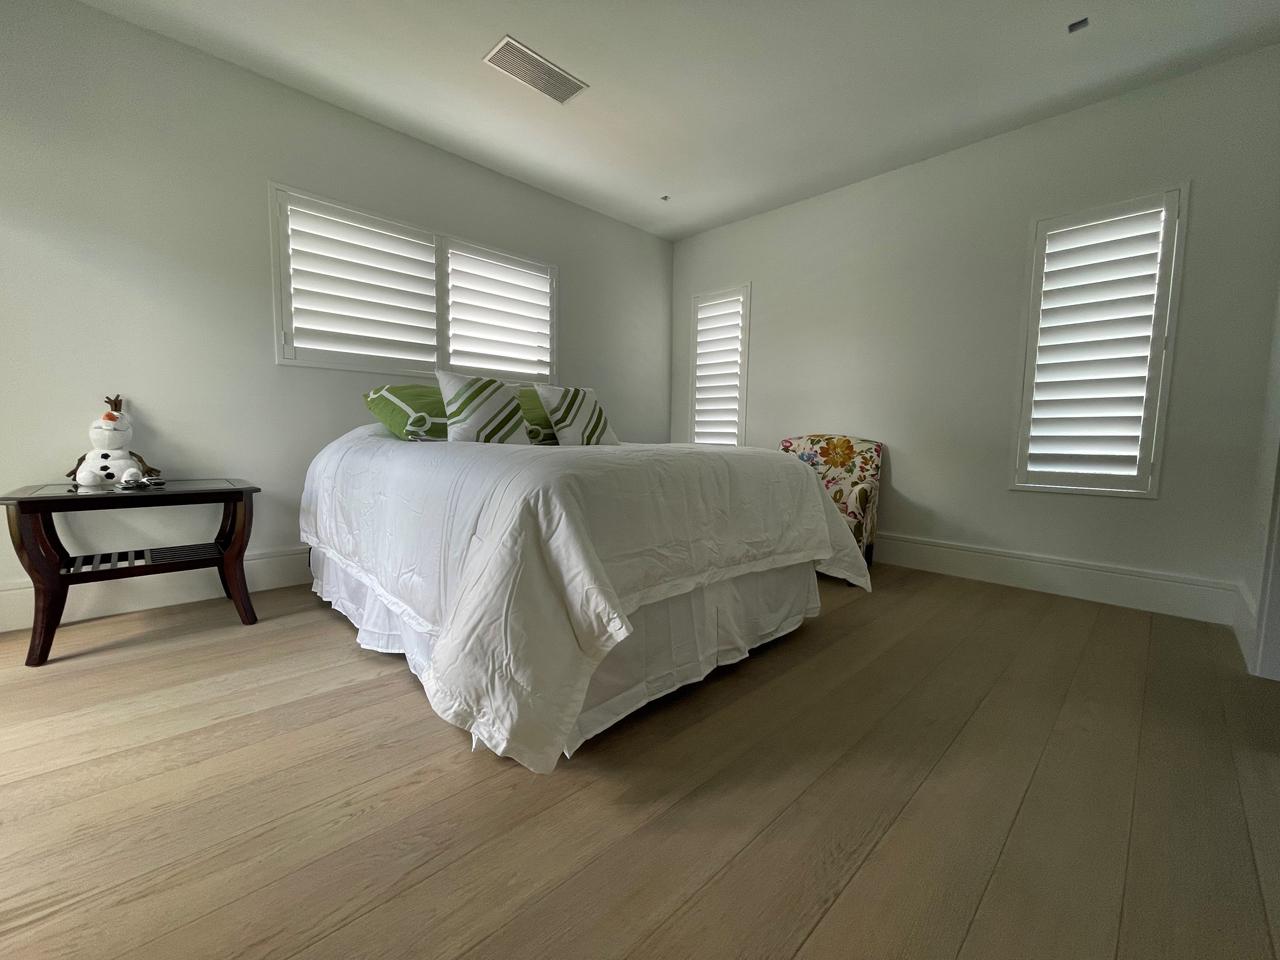 Bedroom with polyshutters